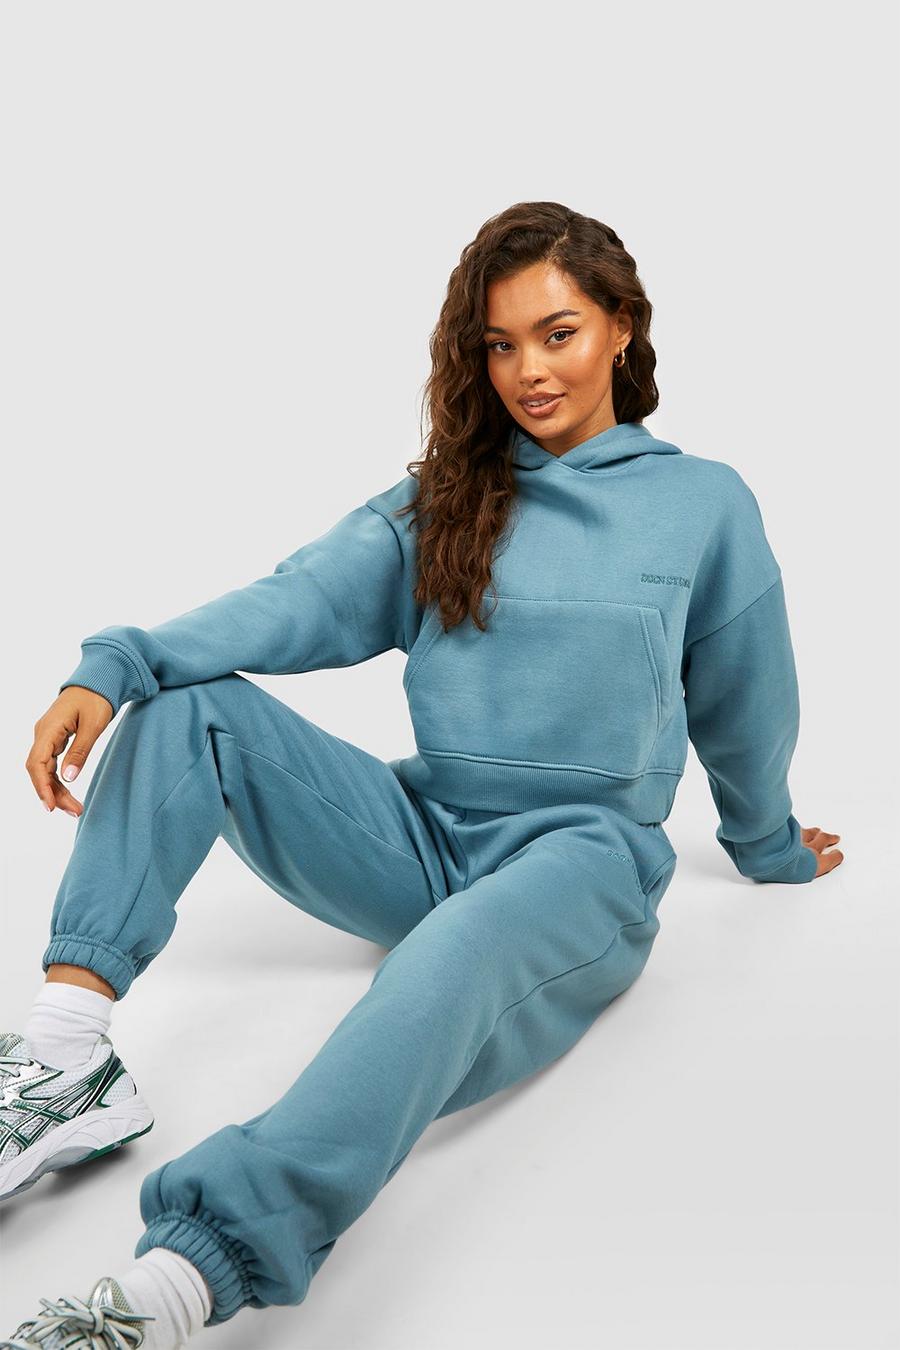 Blue DSGN Studio Embroidered Cropped Hooded Tracksuits 